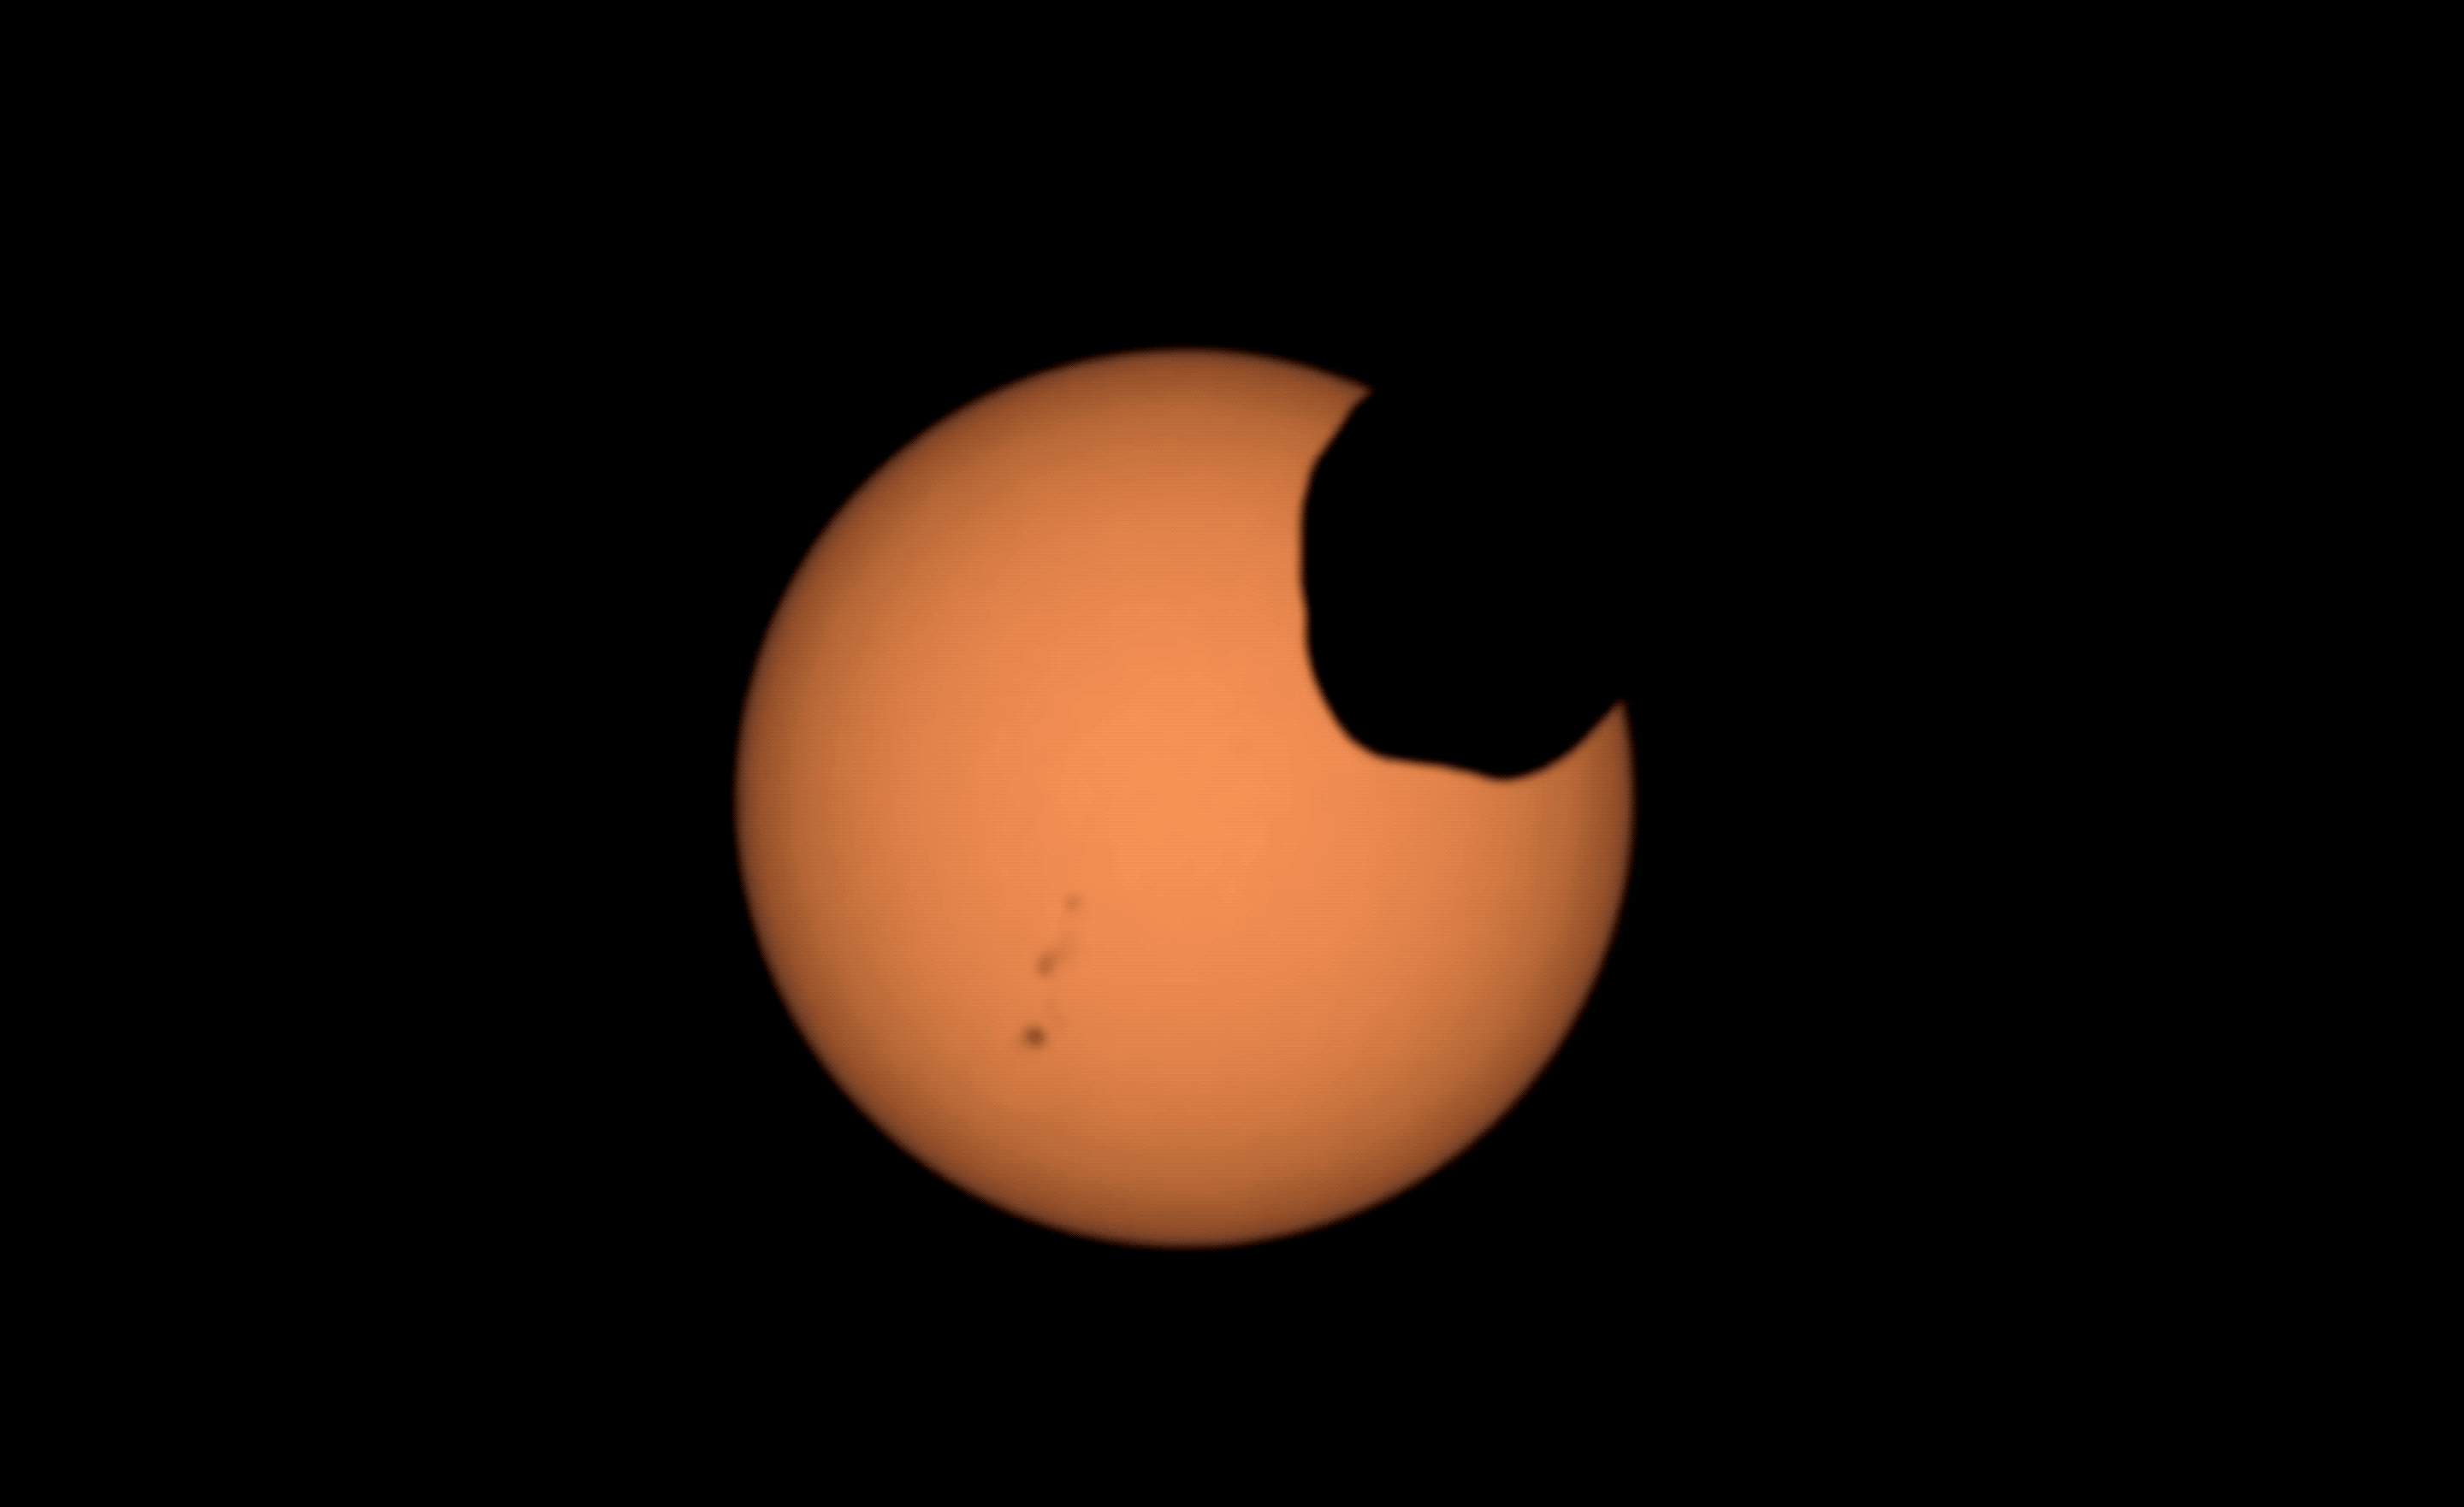 Mars' moon Phobos crosses the face of the sun, captured by NASA’s Perseverance rover with its Mastcam-Z camera. The faint black specks to the bottom left are sunspots.